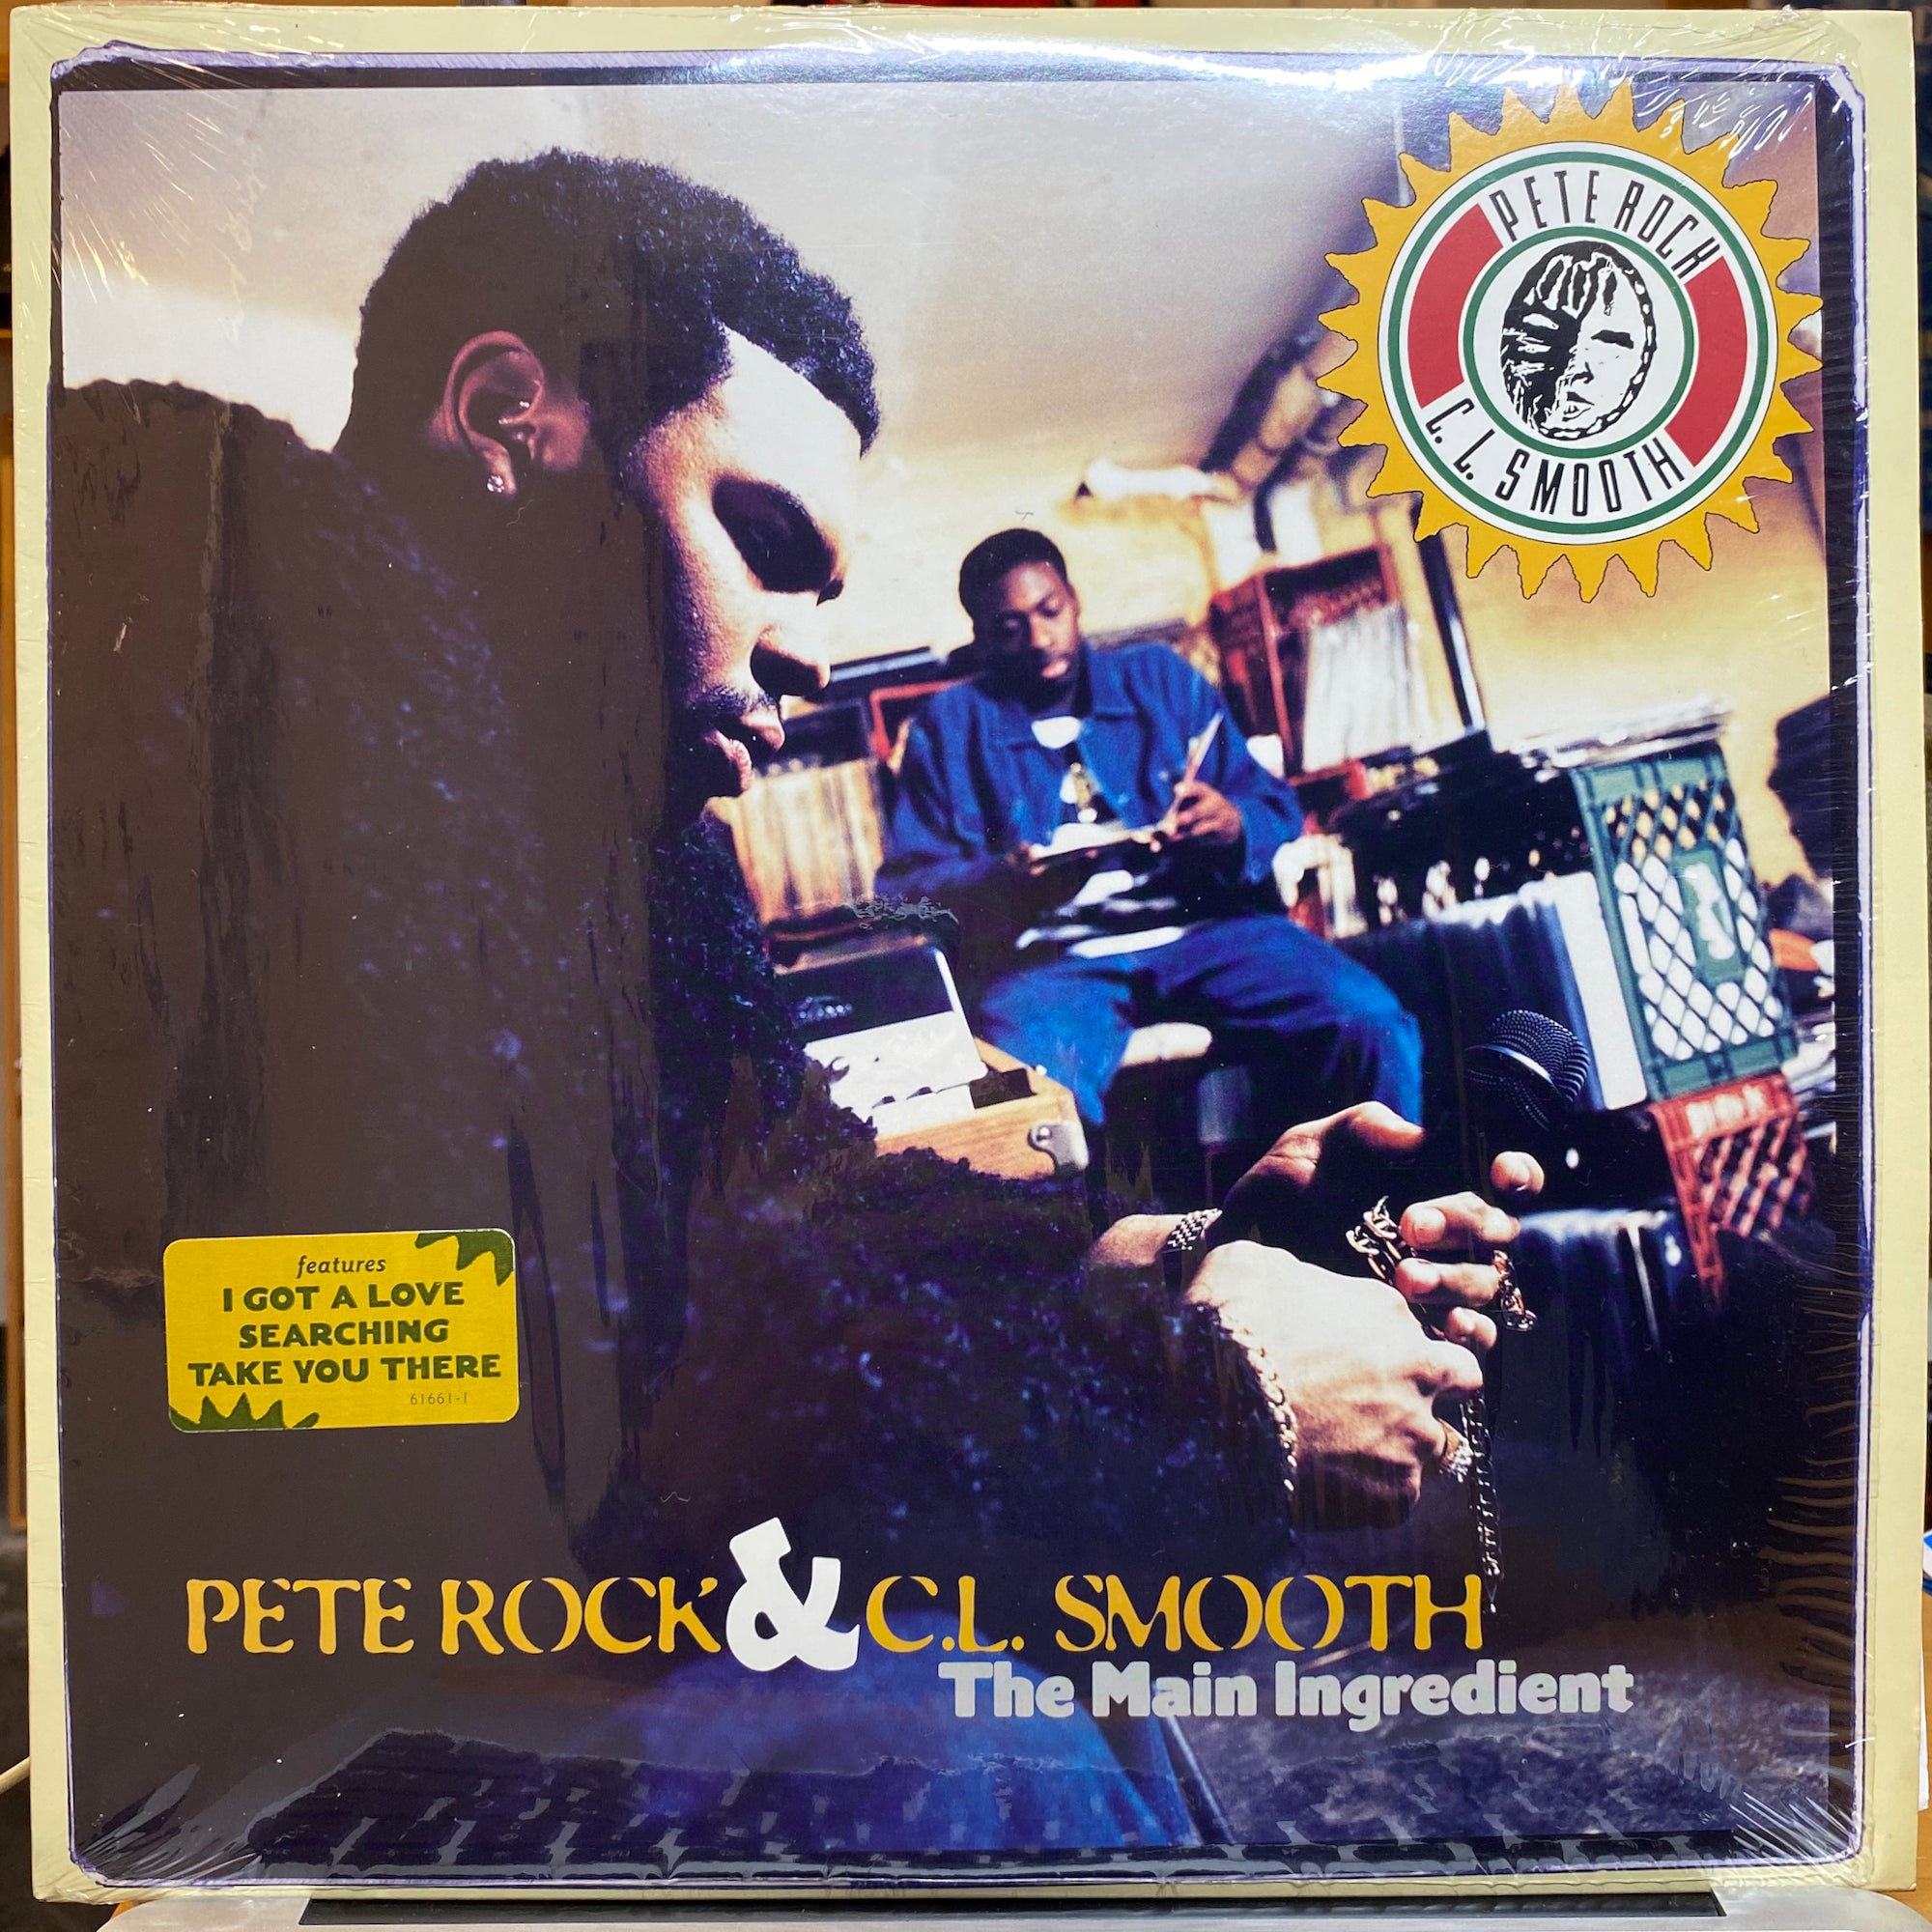 Pete Rock & C.L. Smooth - Searching ①middle - ヒップホップ/ラップ